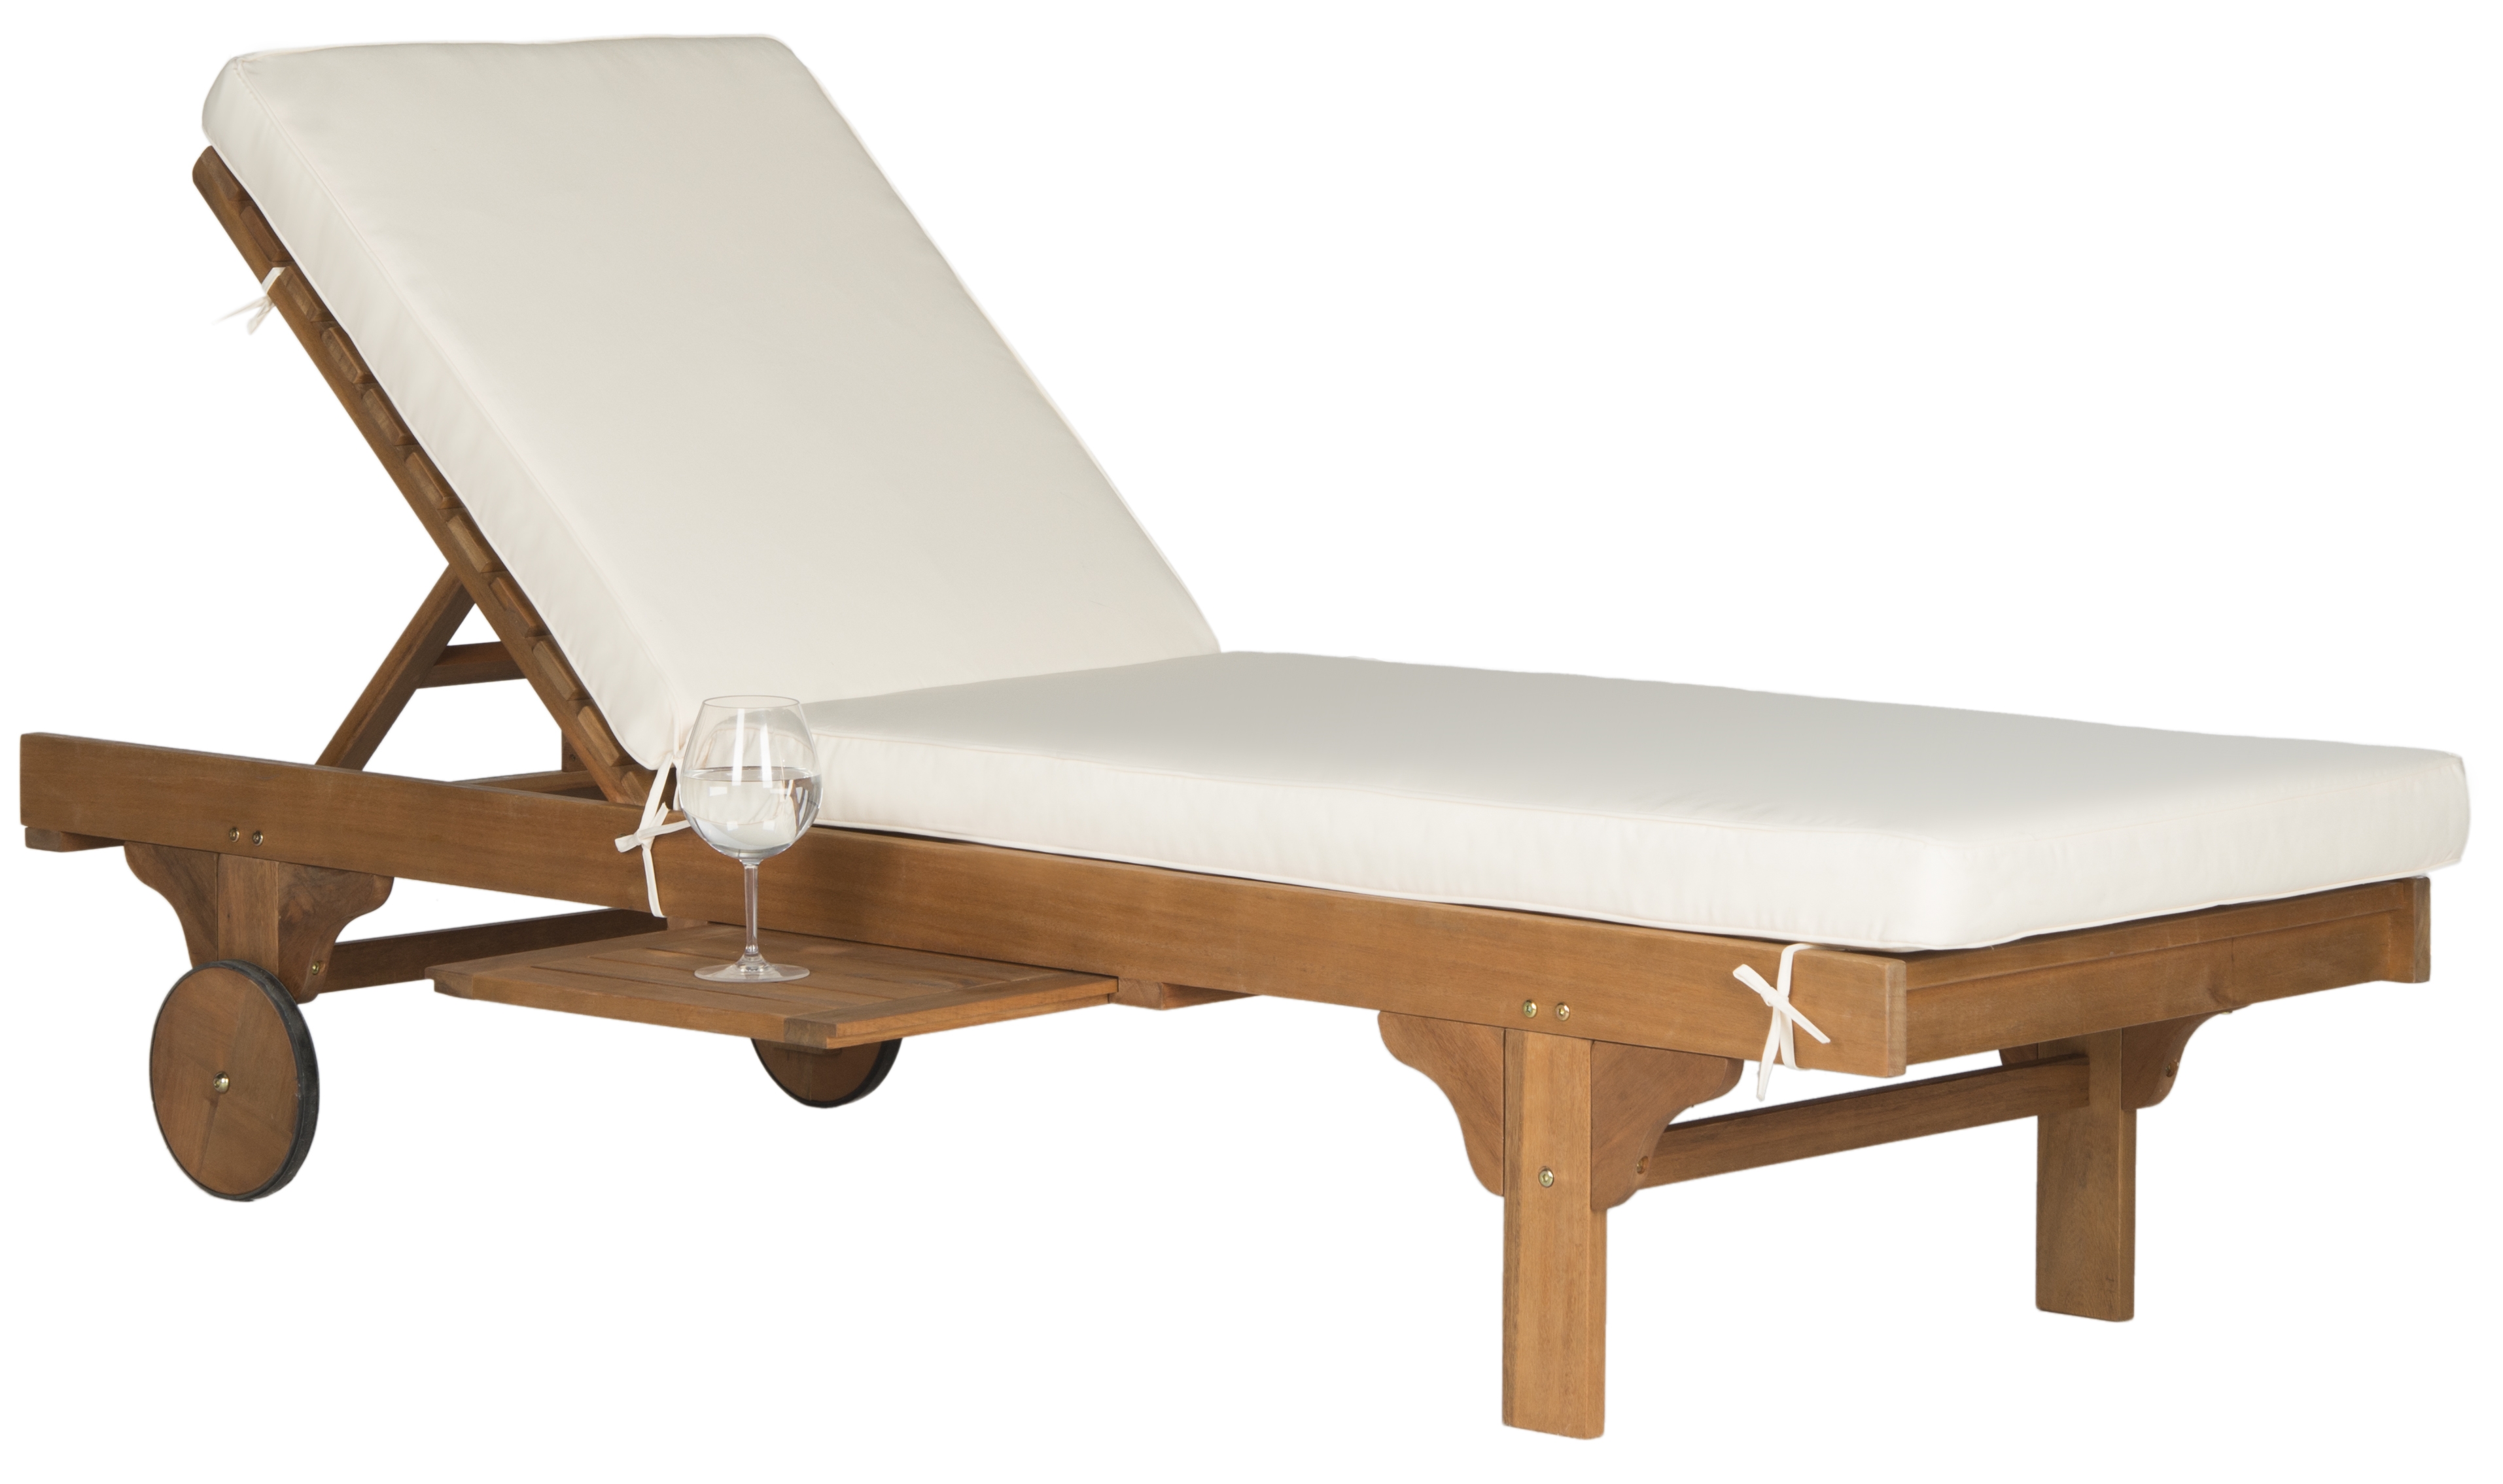 Newport Chaise Lounge Chair With Side Table - Natural/Beige - Safavieh - Image 0